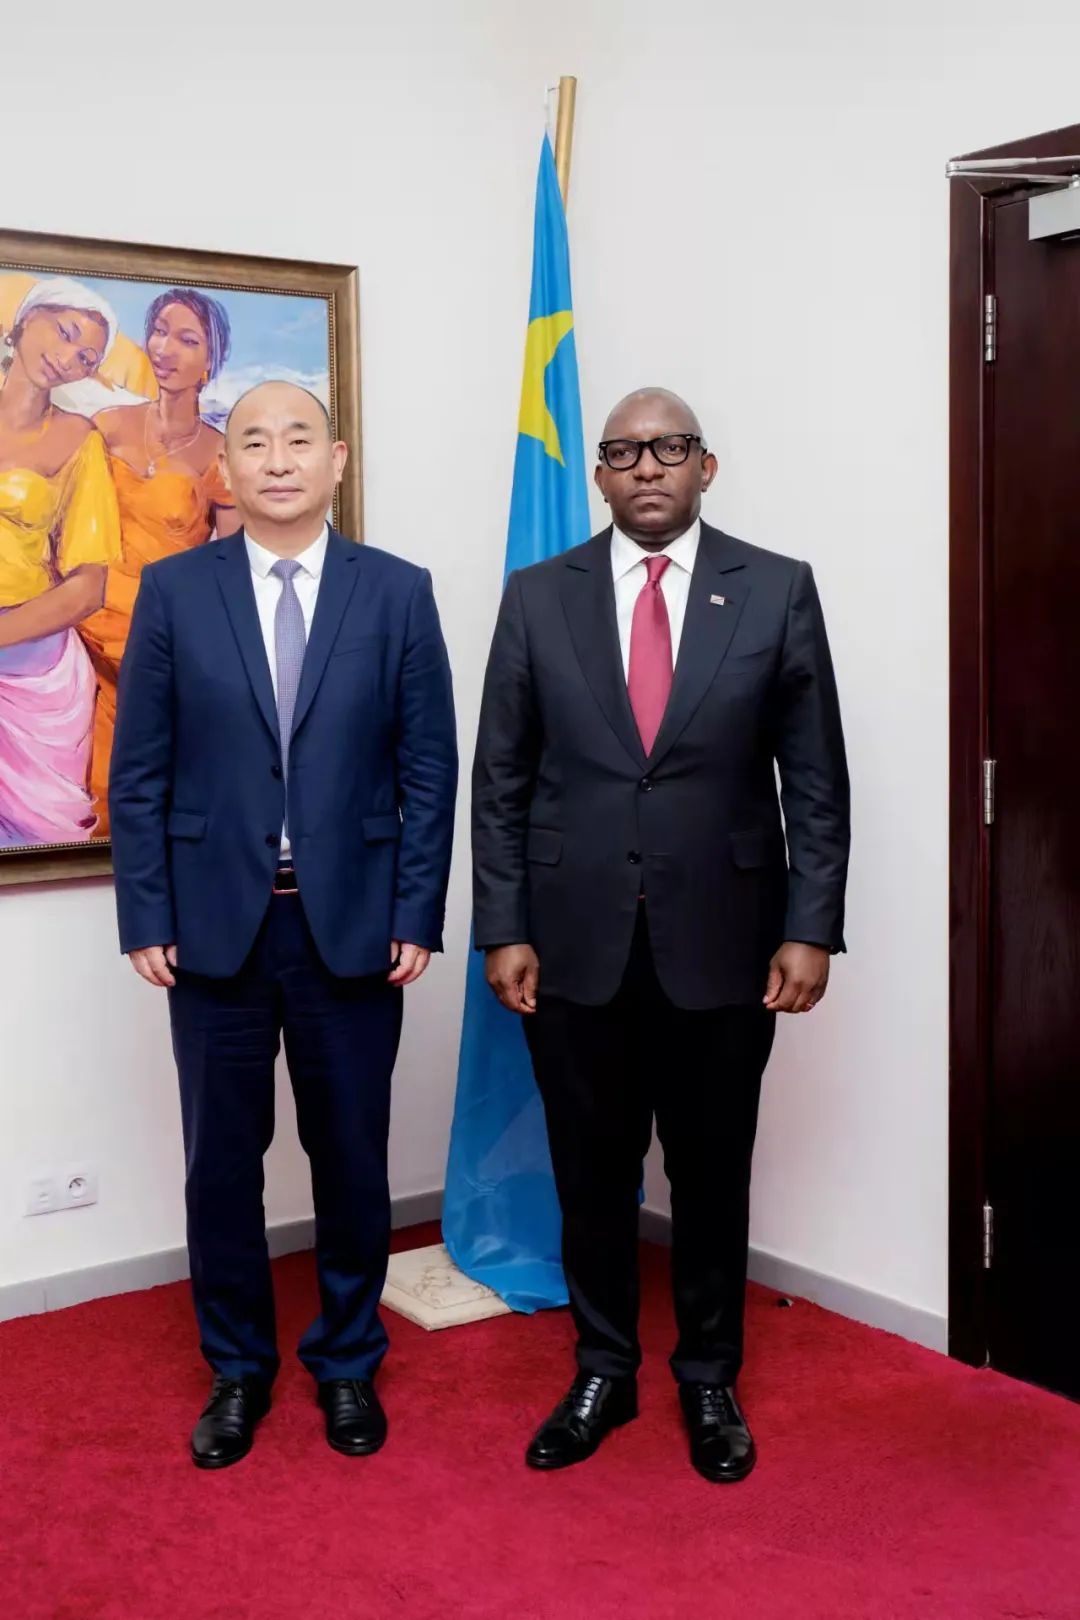 Prime Minister of the Democratic Republic of the Congo meets with sun Ruiwen, President of Luoyang molybdenum industry